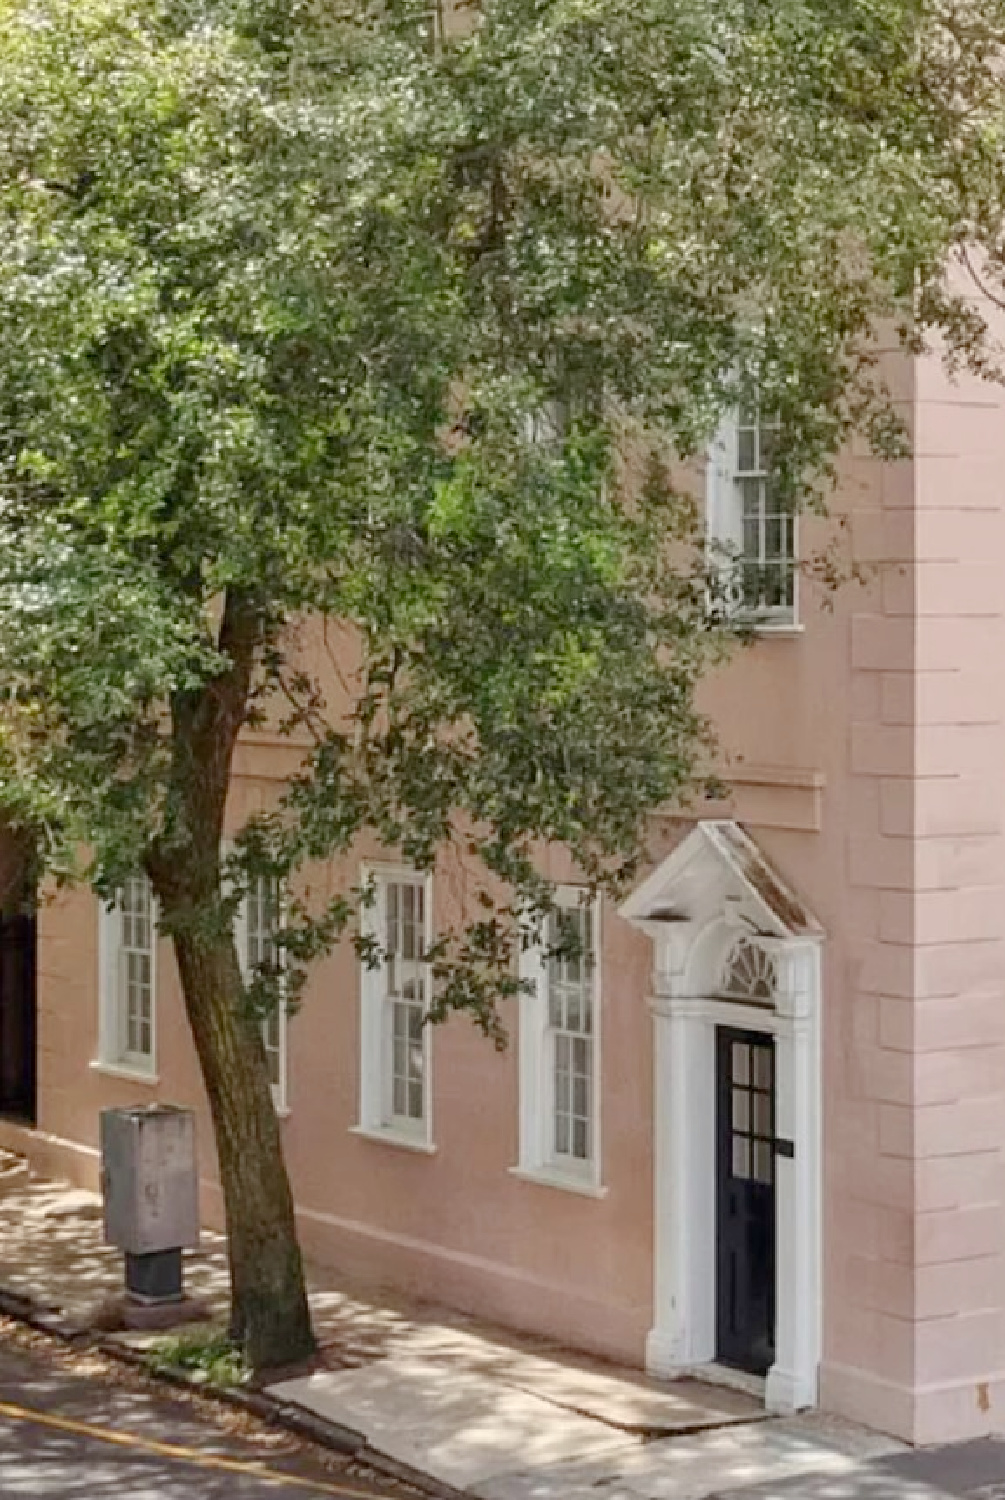 Lovely pink stucco exterior on a historic Charleston home on 49 Broad Street. #charlestonhomes #pinkhouses